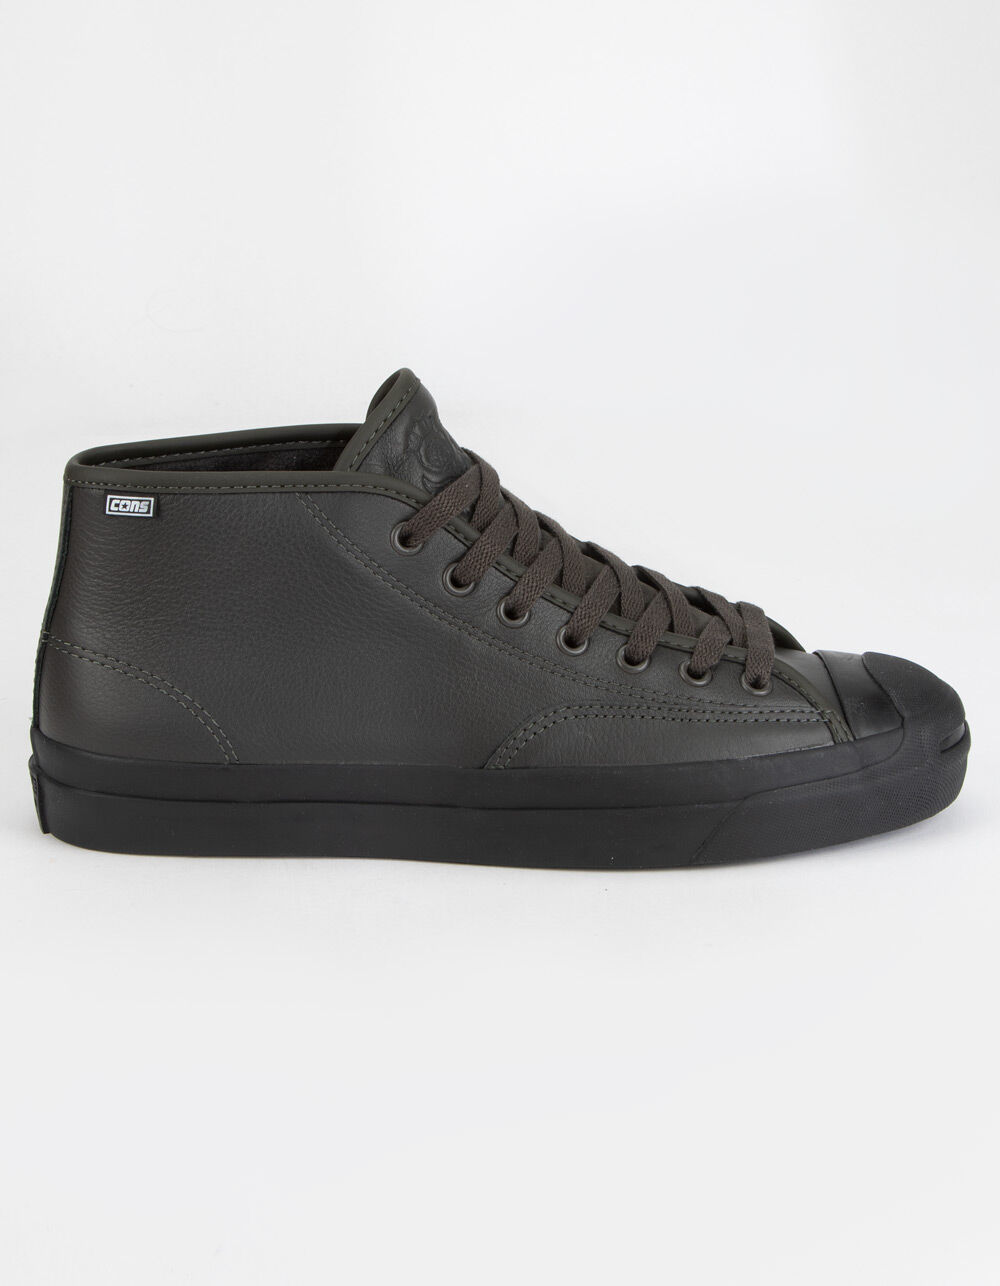 CONVERSE Jake Johnson CONS Jack Purcell Pro Shoes - BLACK COMBO | Tillys